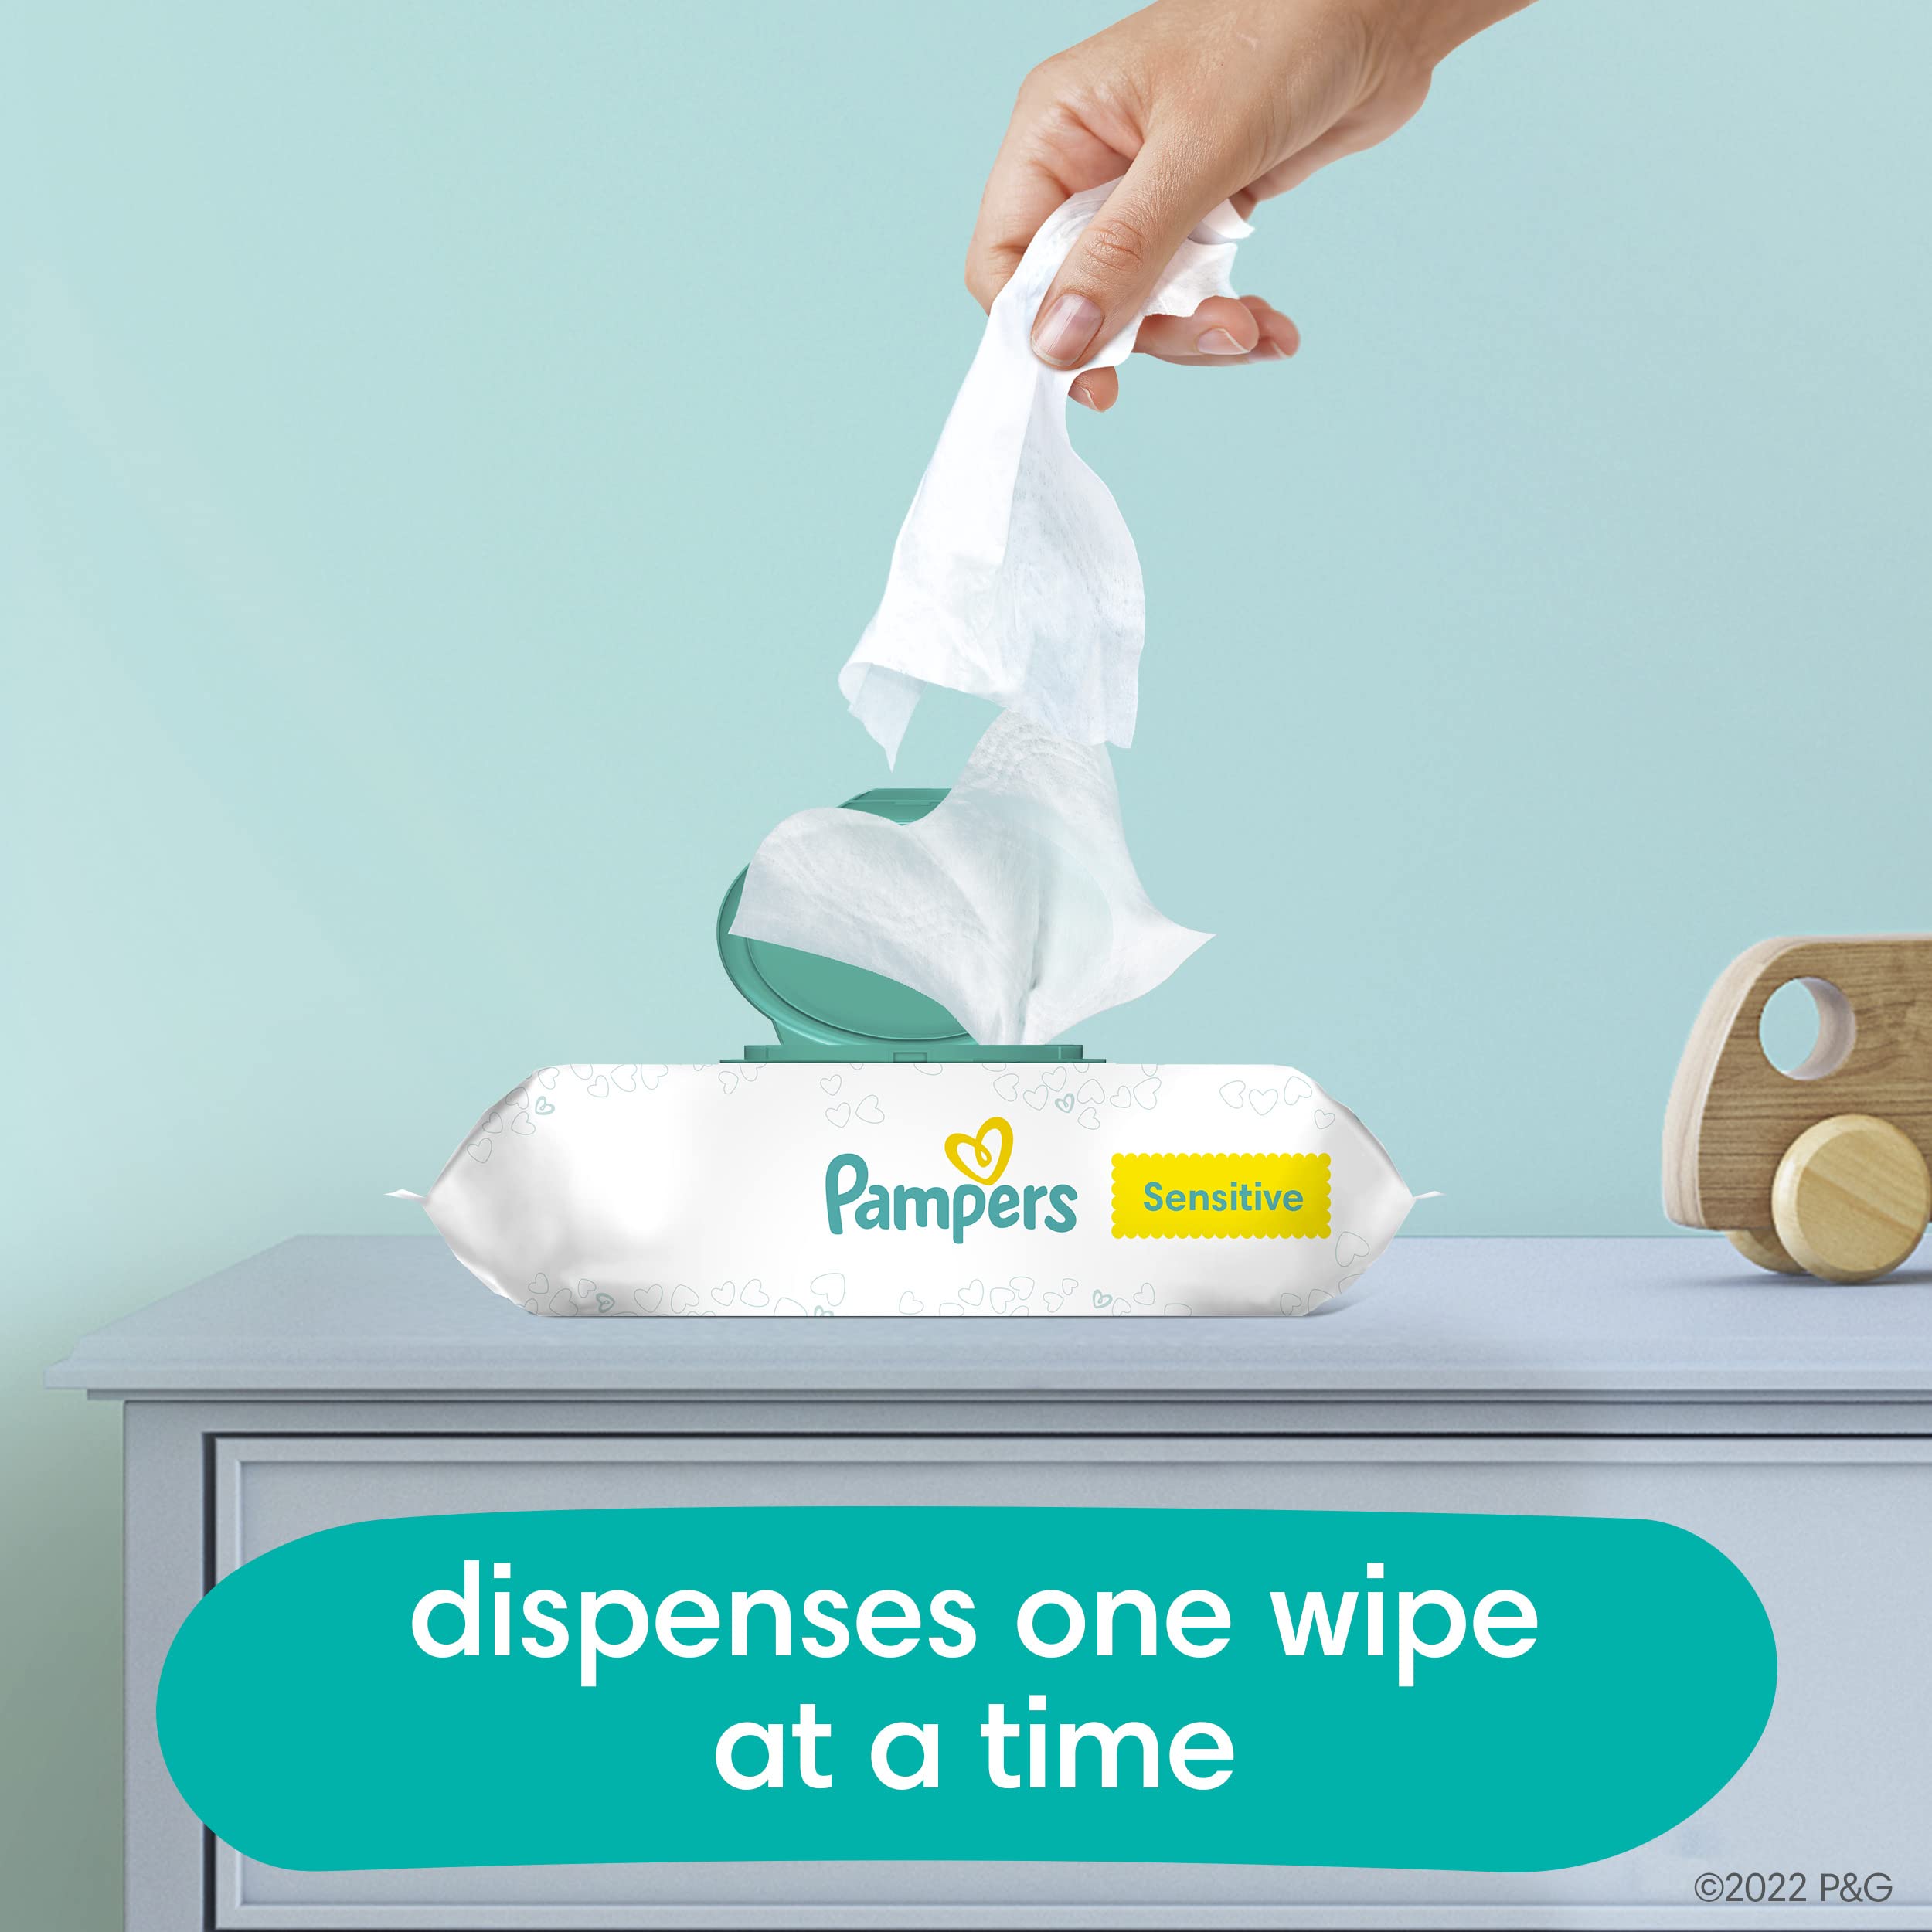 Baby Wipes Fitment, 504 count - Pampers Sensitive Water Based Hypoallergenic and Unscented Baby Wipes (Packaging May Vary)